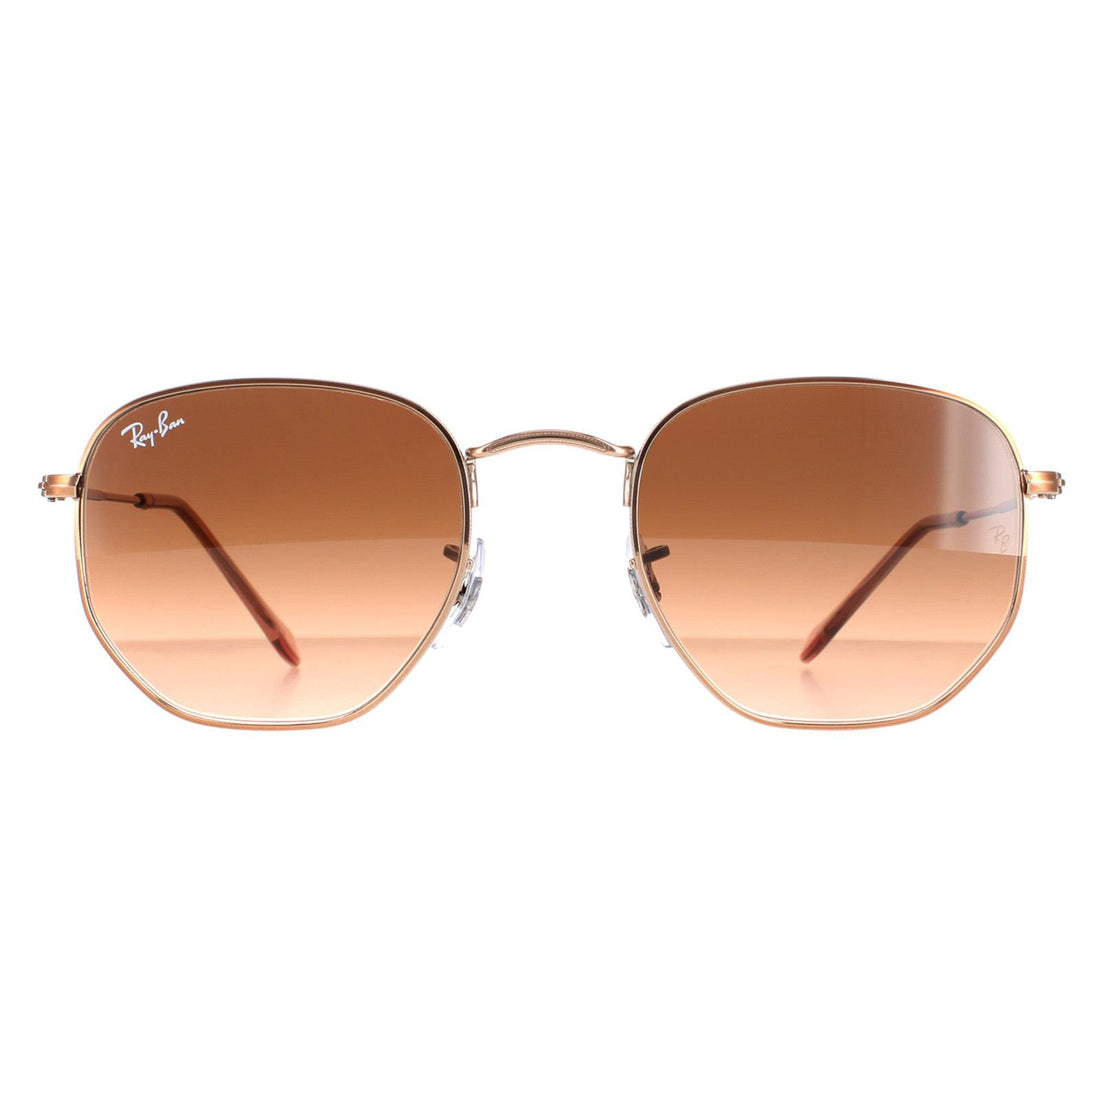 Ray-Ban Hexagonal RB3548N Sunglasses Polished Bronze Copper Brown Gradient 51